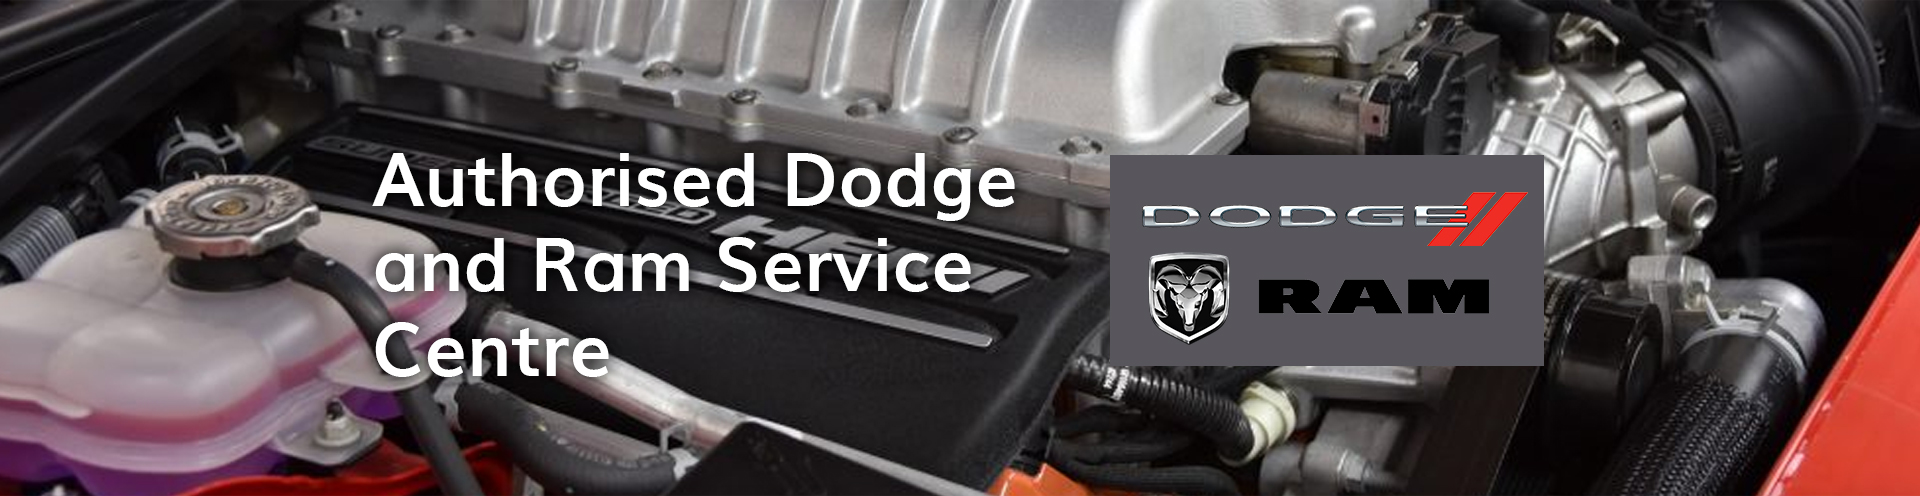 Approved Dodge and RAM Service Centre UK. Recalls and updates